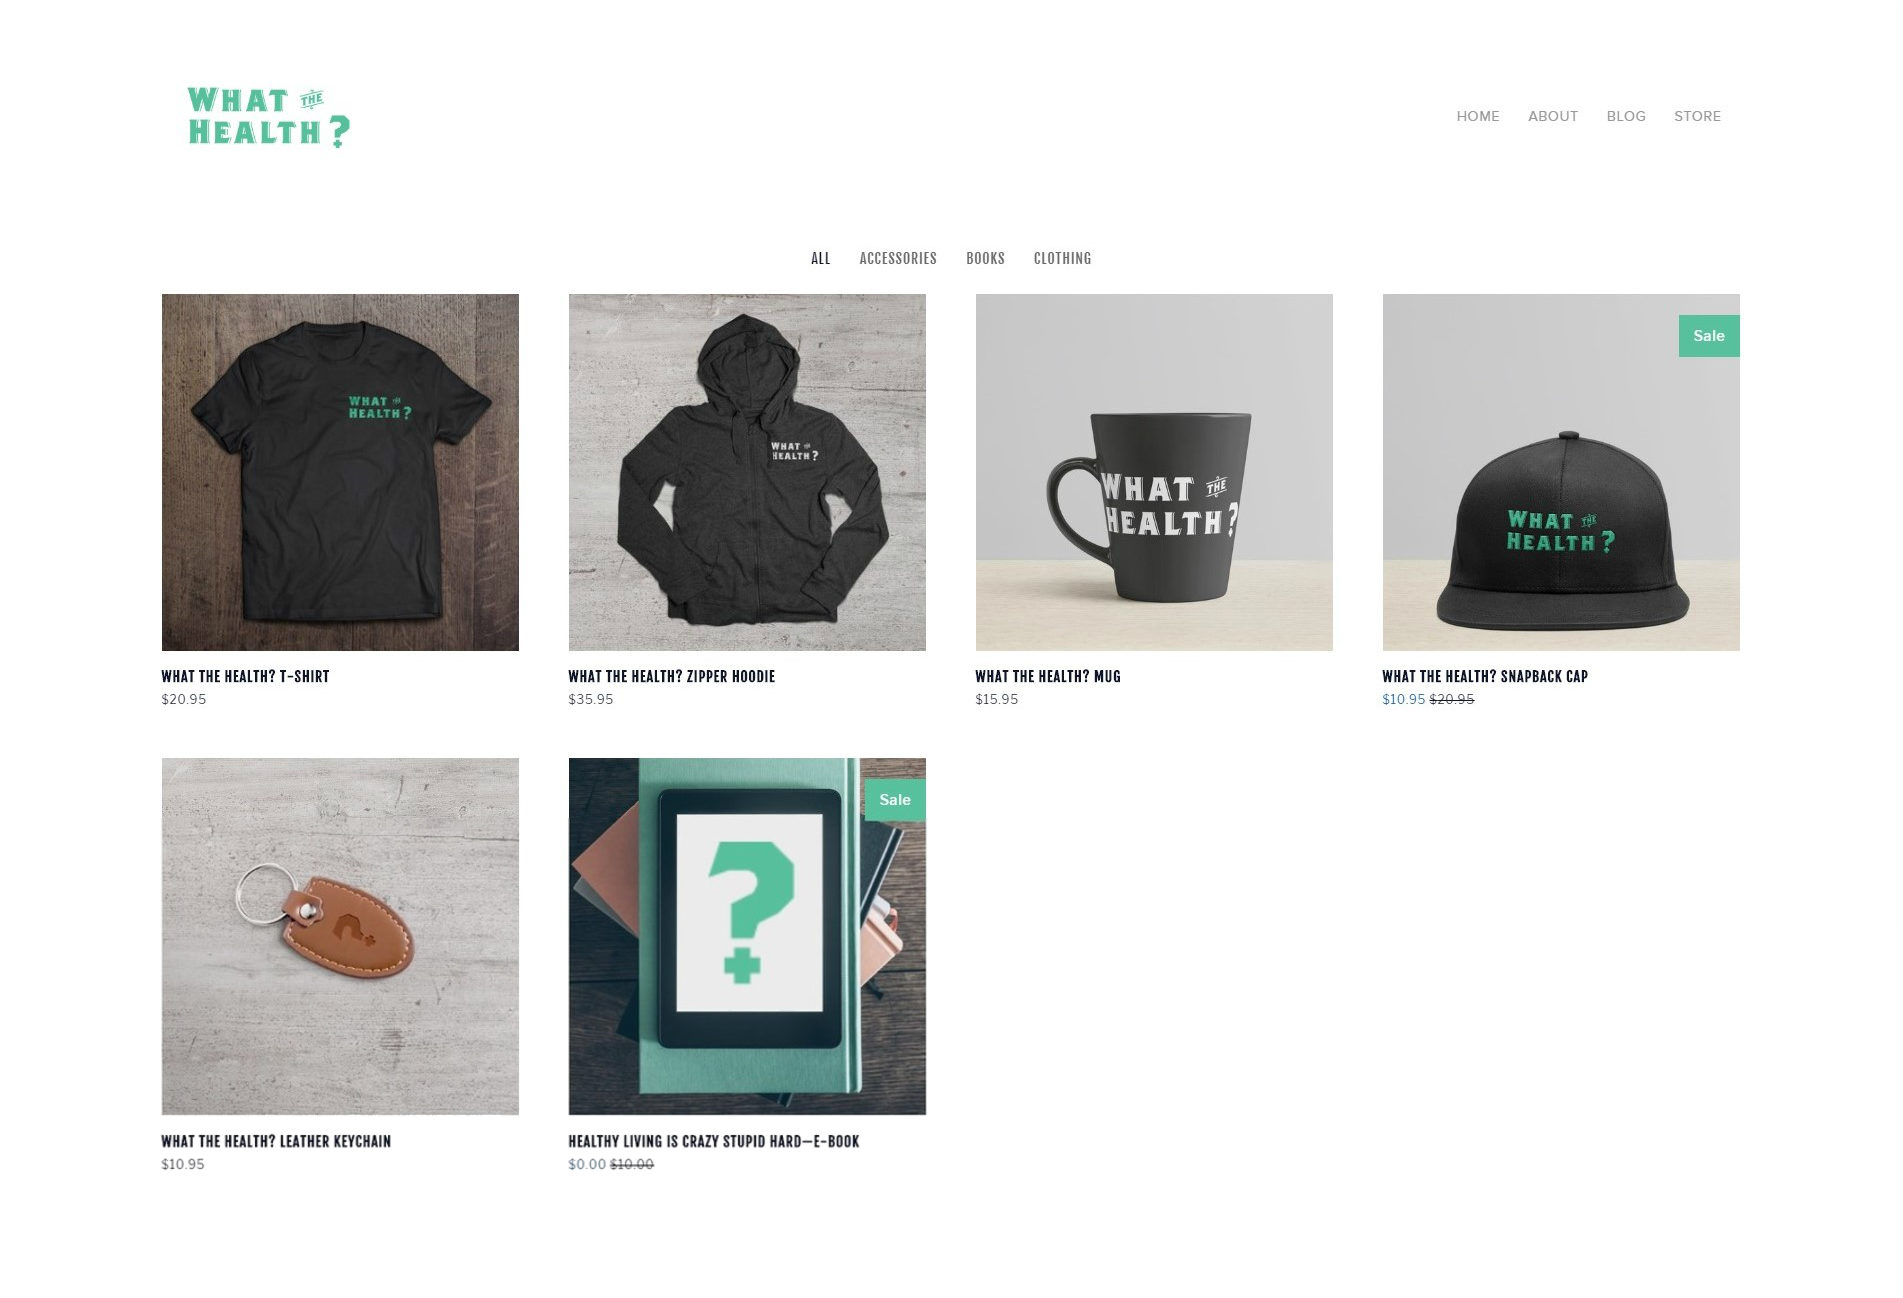 squarespace ecommerce store